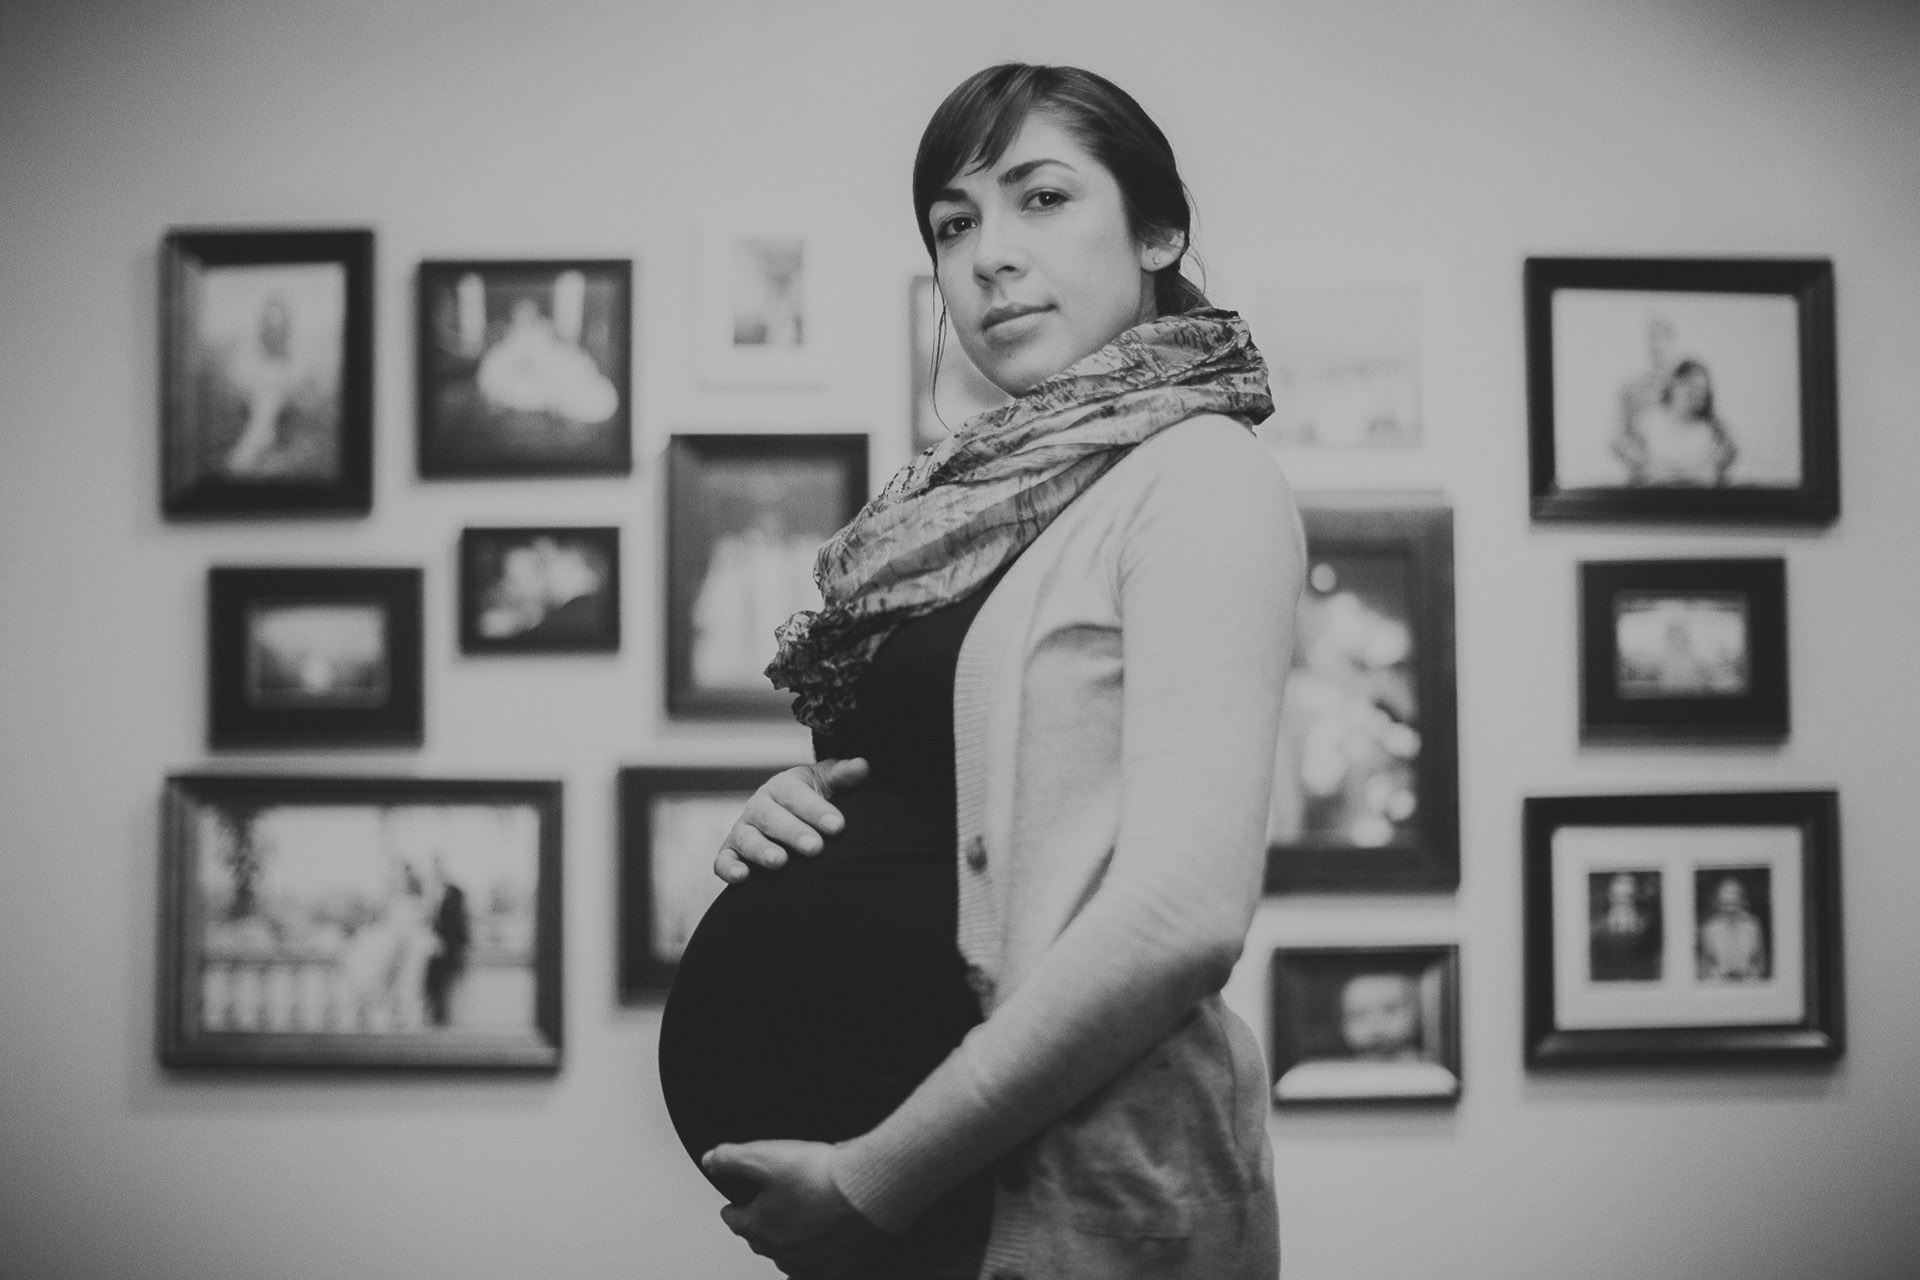 Angela Clunk Maternity Photos During Pregnancy - too much awesomeness photography - image 47.jpg